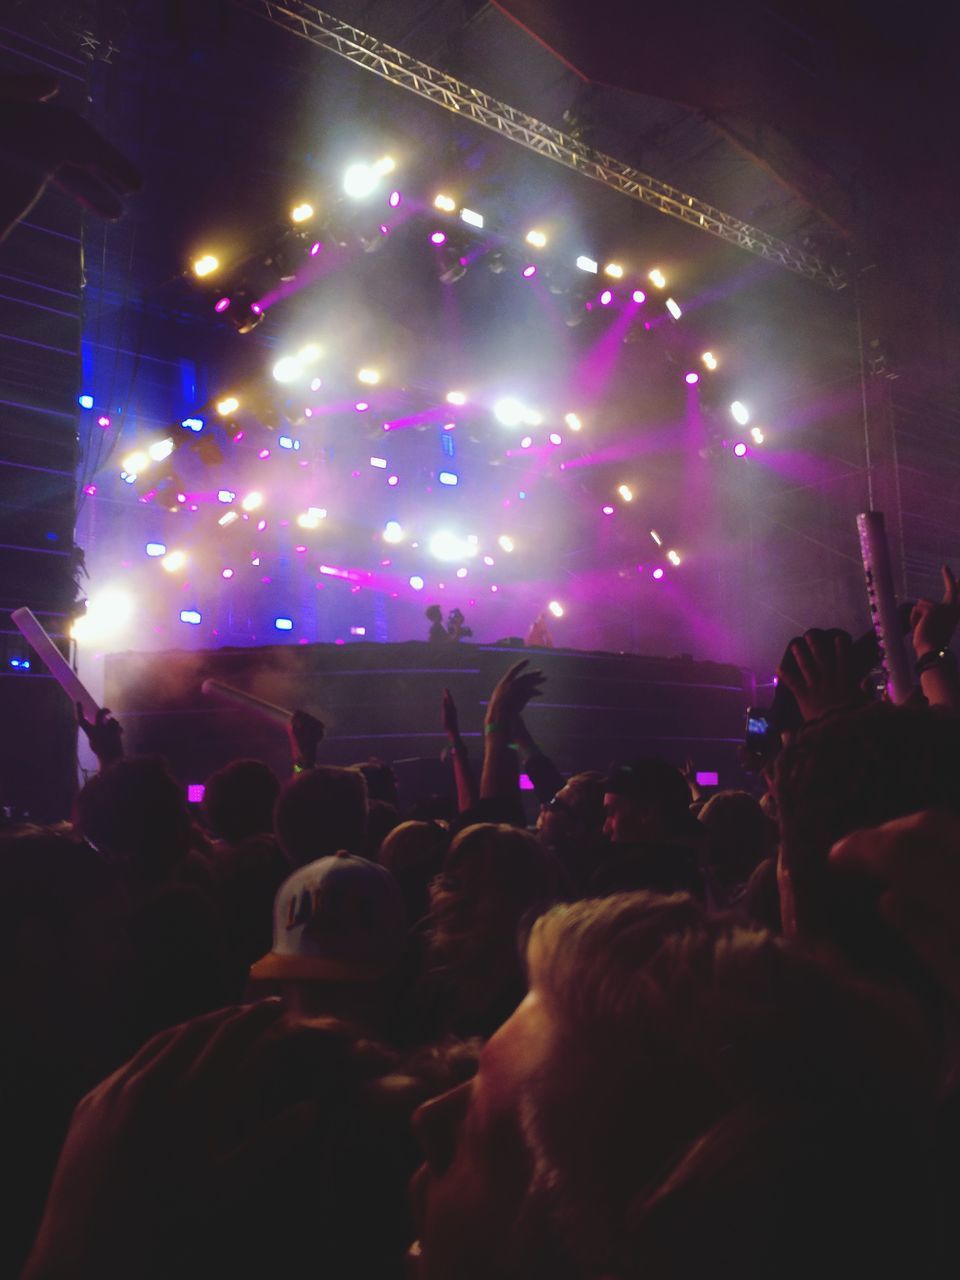 large group of people, illuminated, crowd, night, arts culture and entertainment, person, enjoyment, music, nightlife, event, lifestyles, men, performance, music festival, stage - performance space, concert, fun, leisure activity, popular music concert